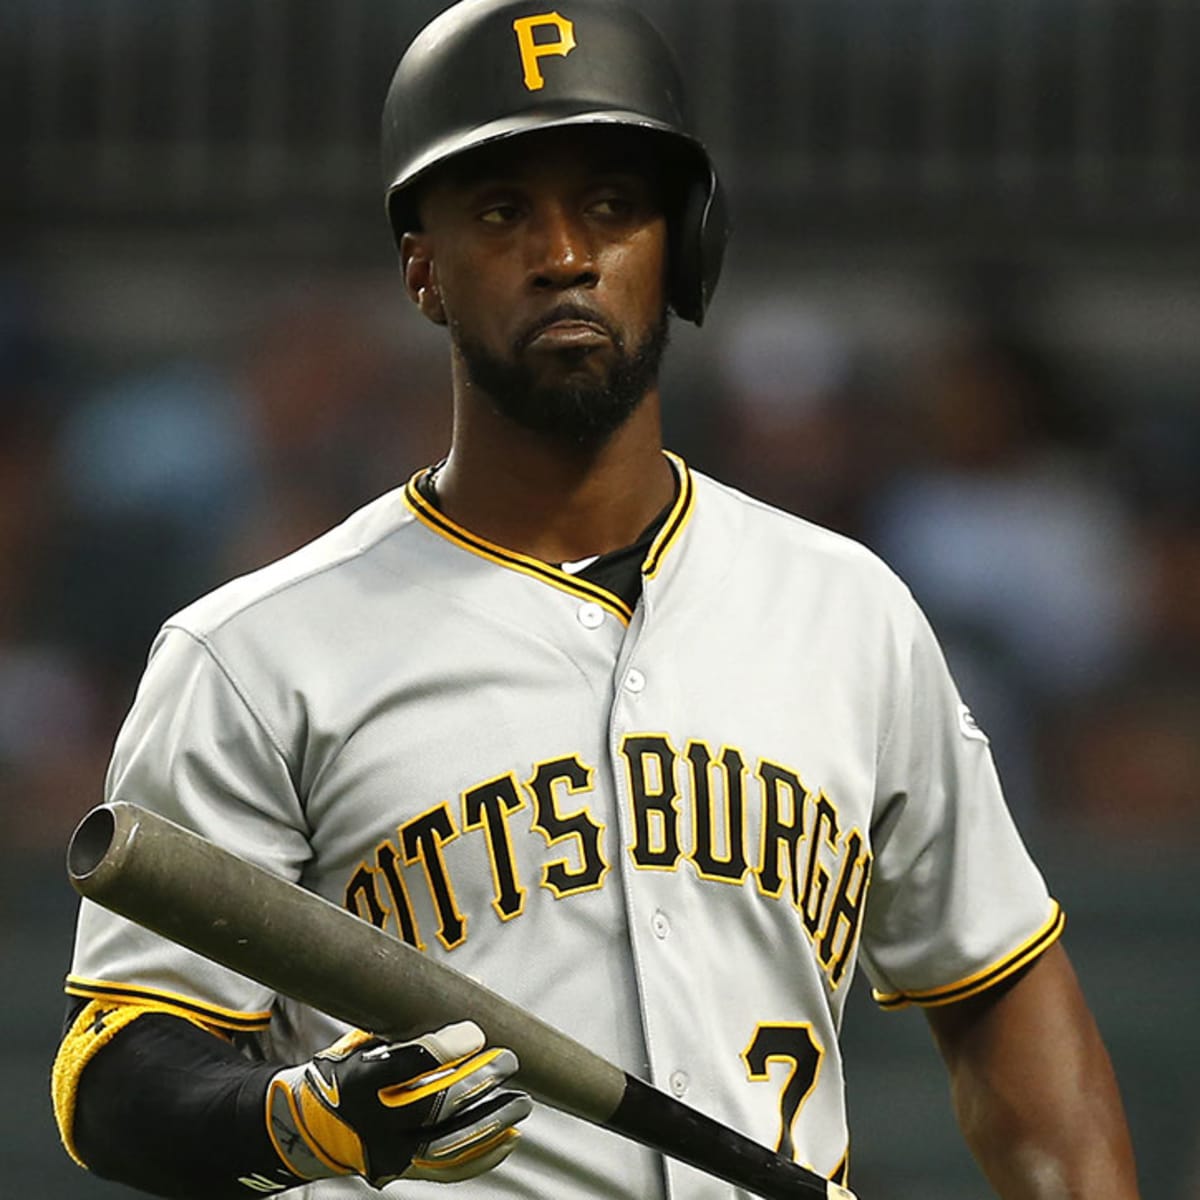 Mighty McCutchen busts out of slump, powers Pirates to victory